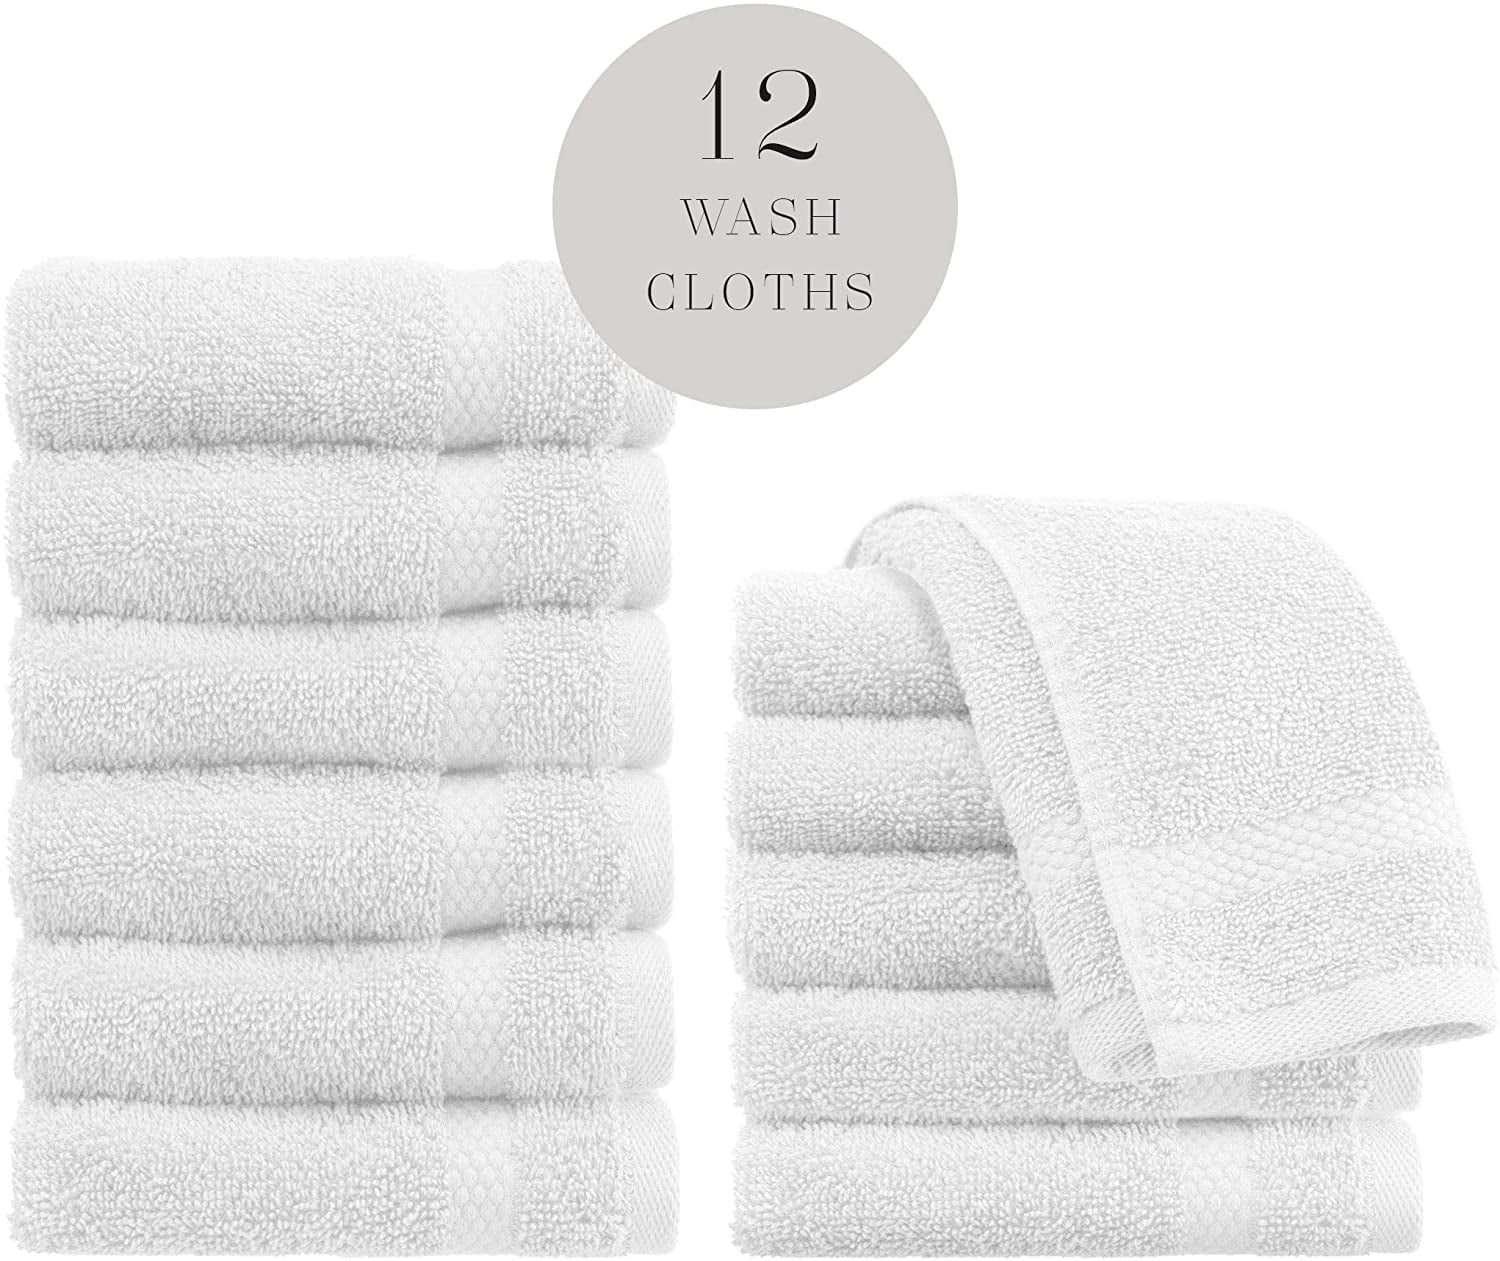 13x13 Hotel Face TowelBrown 12/Pack Details about   WhiteClassic Luxury Cotton Washcloths 